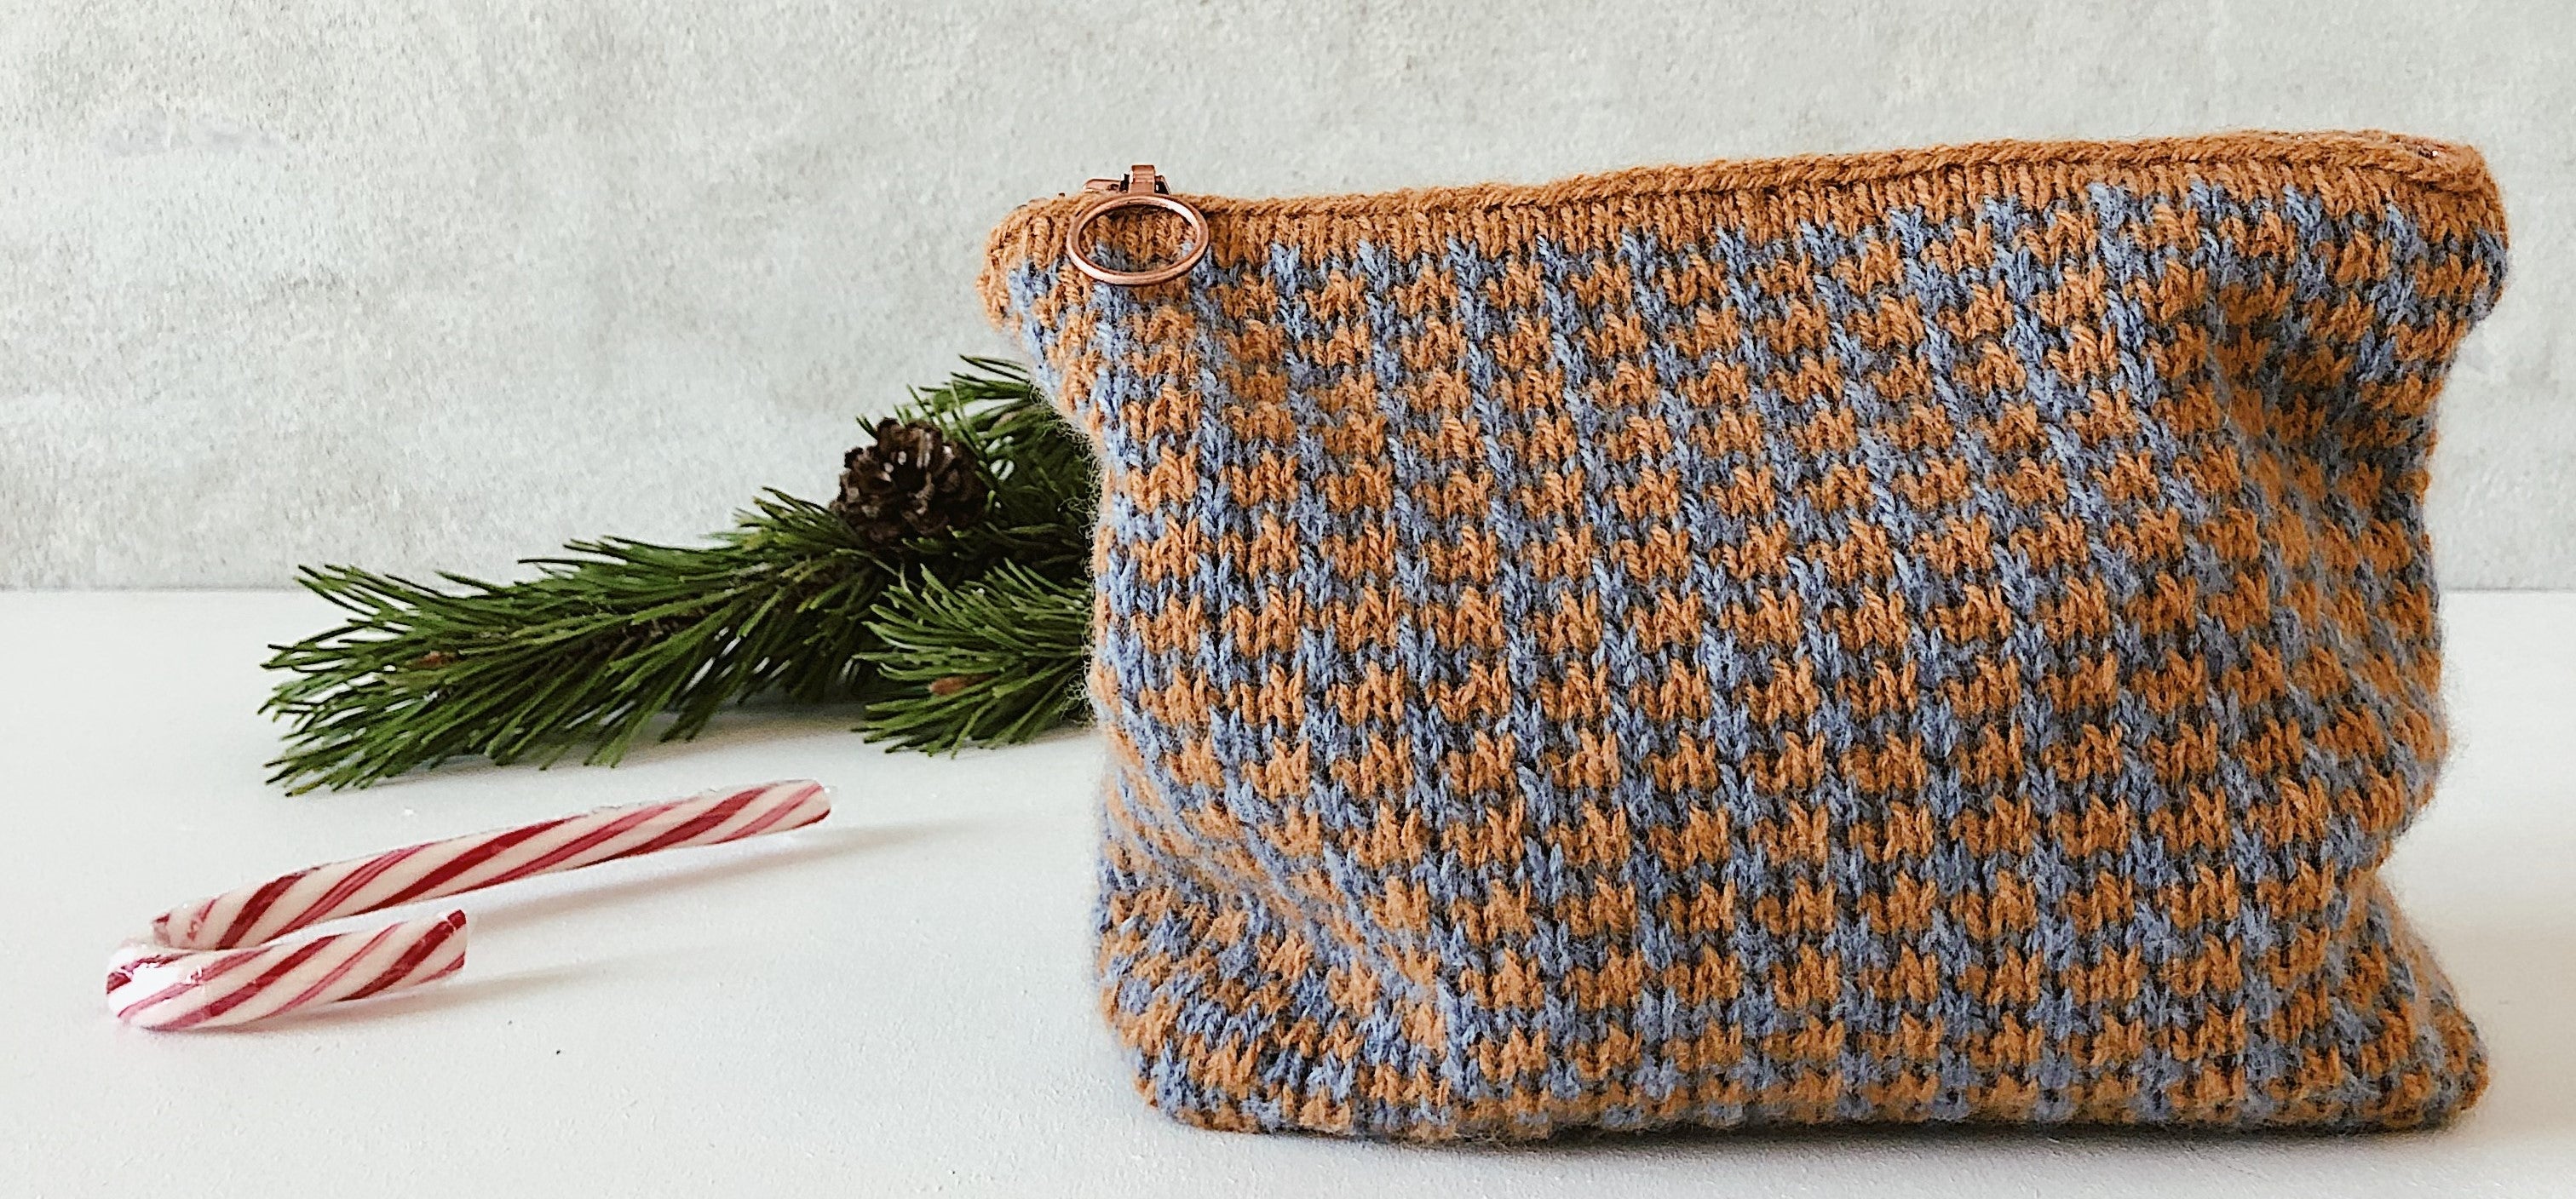 Slip Stitch - How to Knit - Knitting Techniques